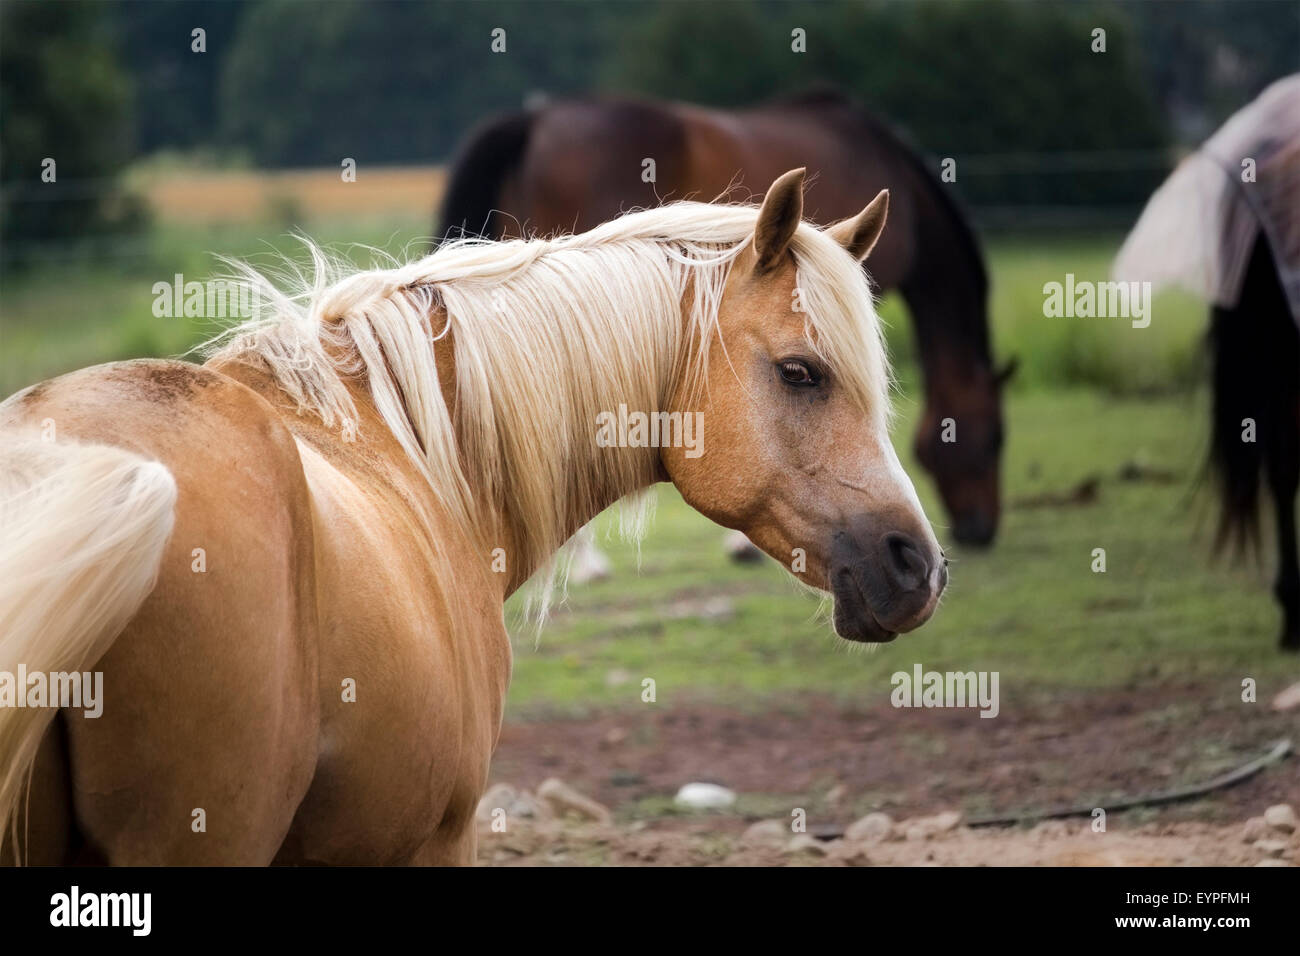 Golden Palomino with head turned to look at photographer. Rear view. Stock Photo